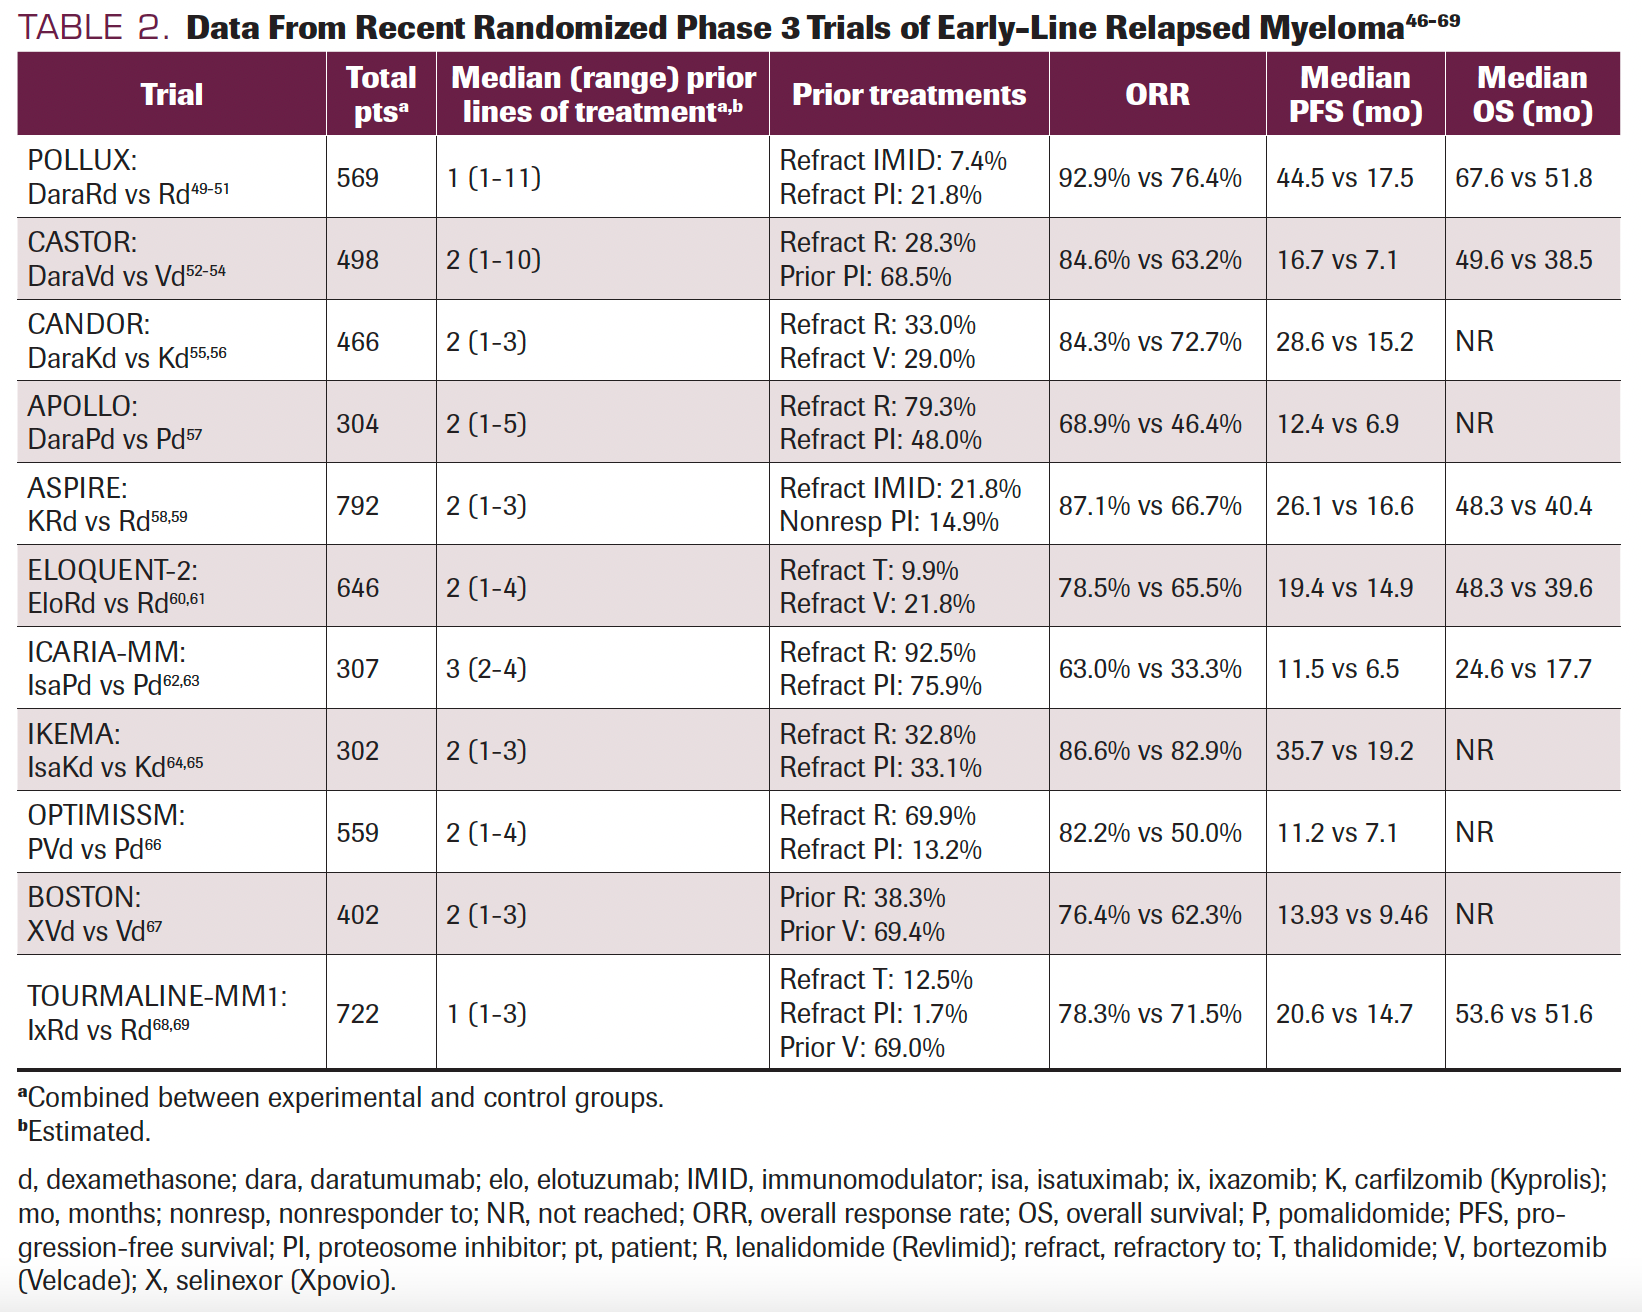 TABLE 2. Data From Recent Randomized Phase 3 Trials of Early-Line Relapsed Myeloma46-69